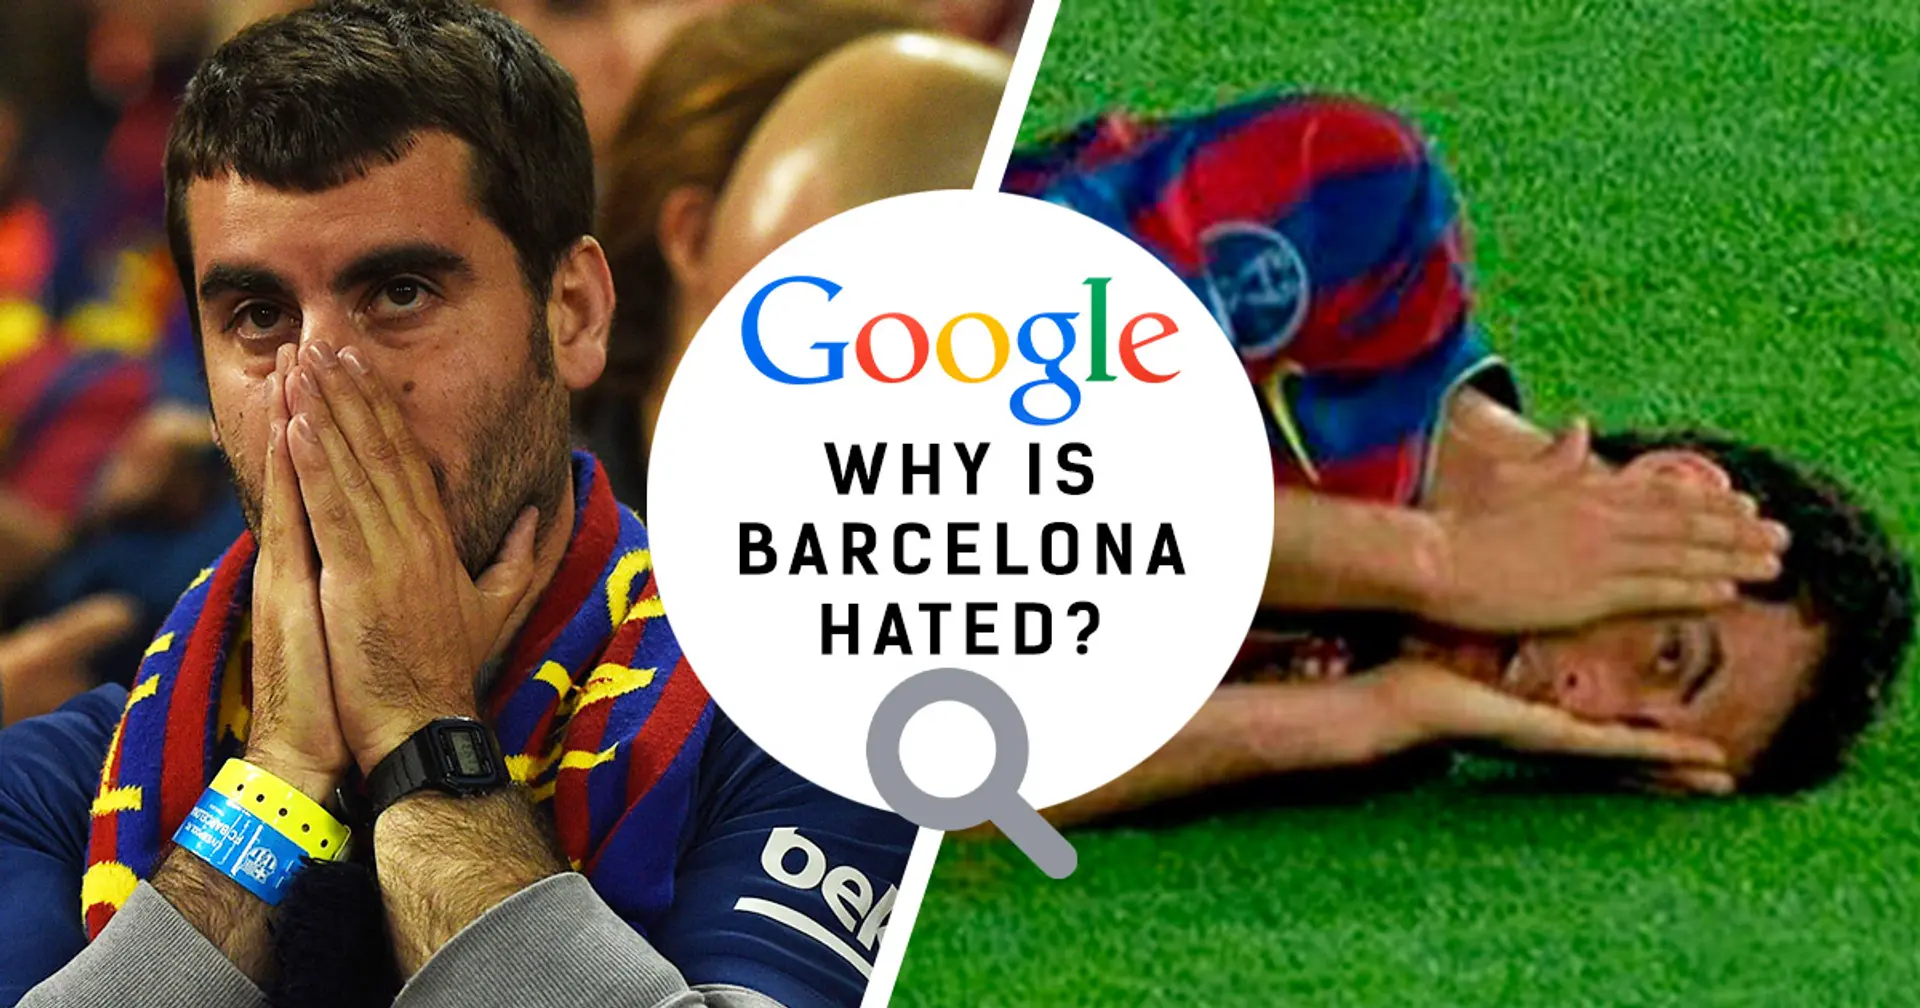 Why is Barcelona hated? Answered